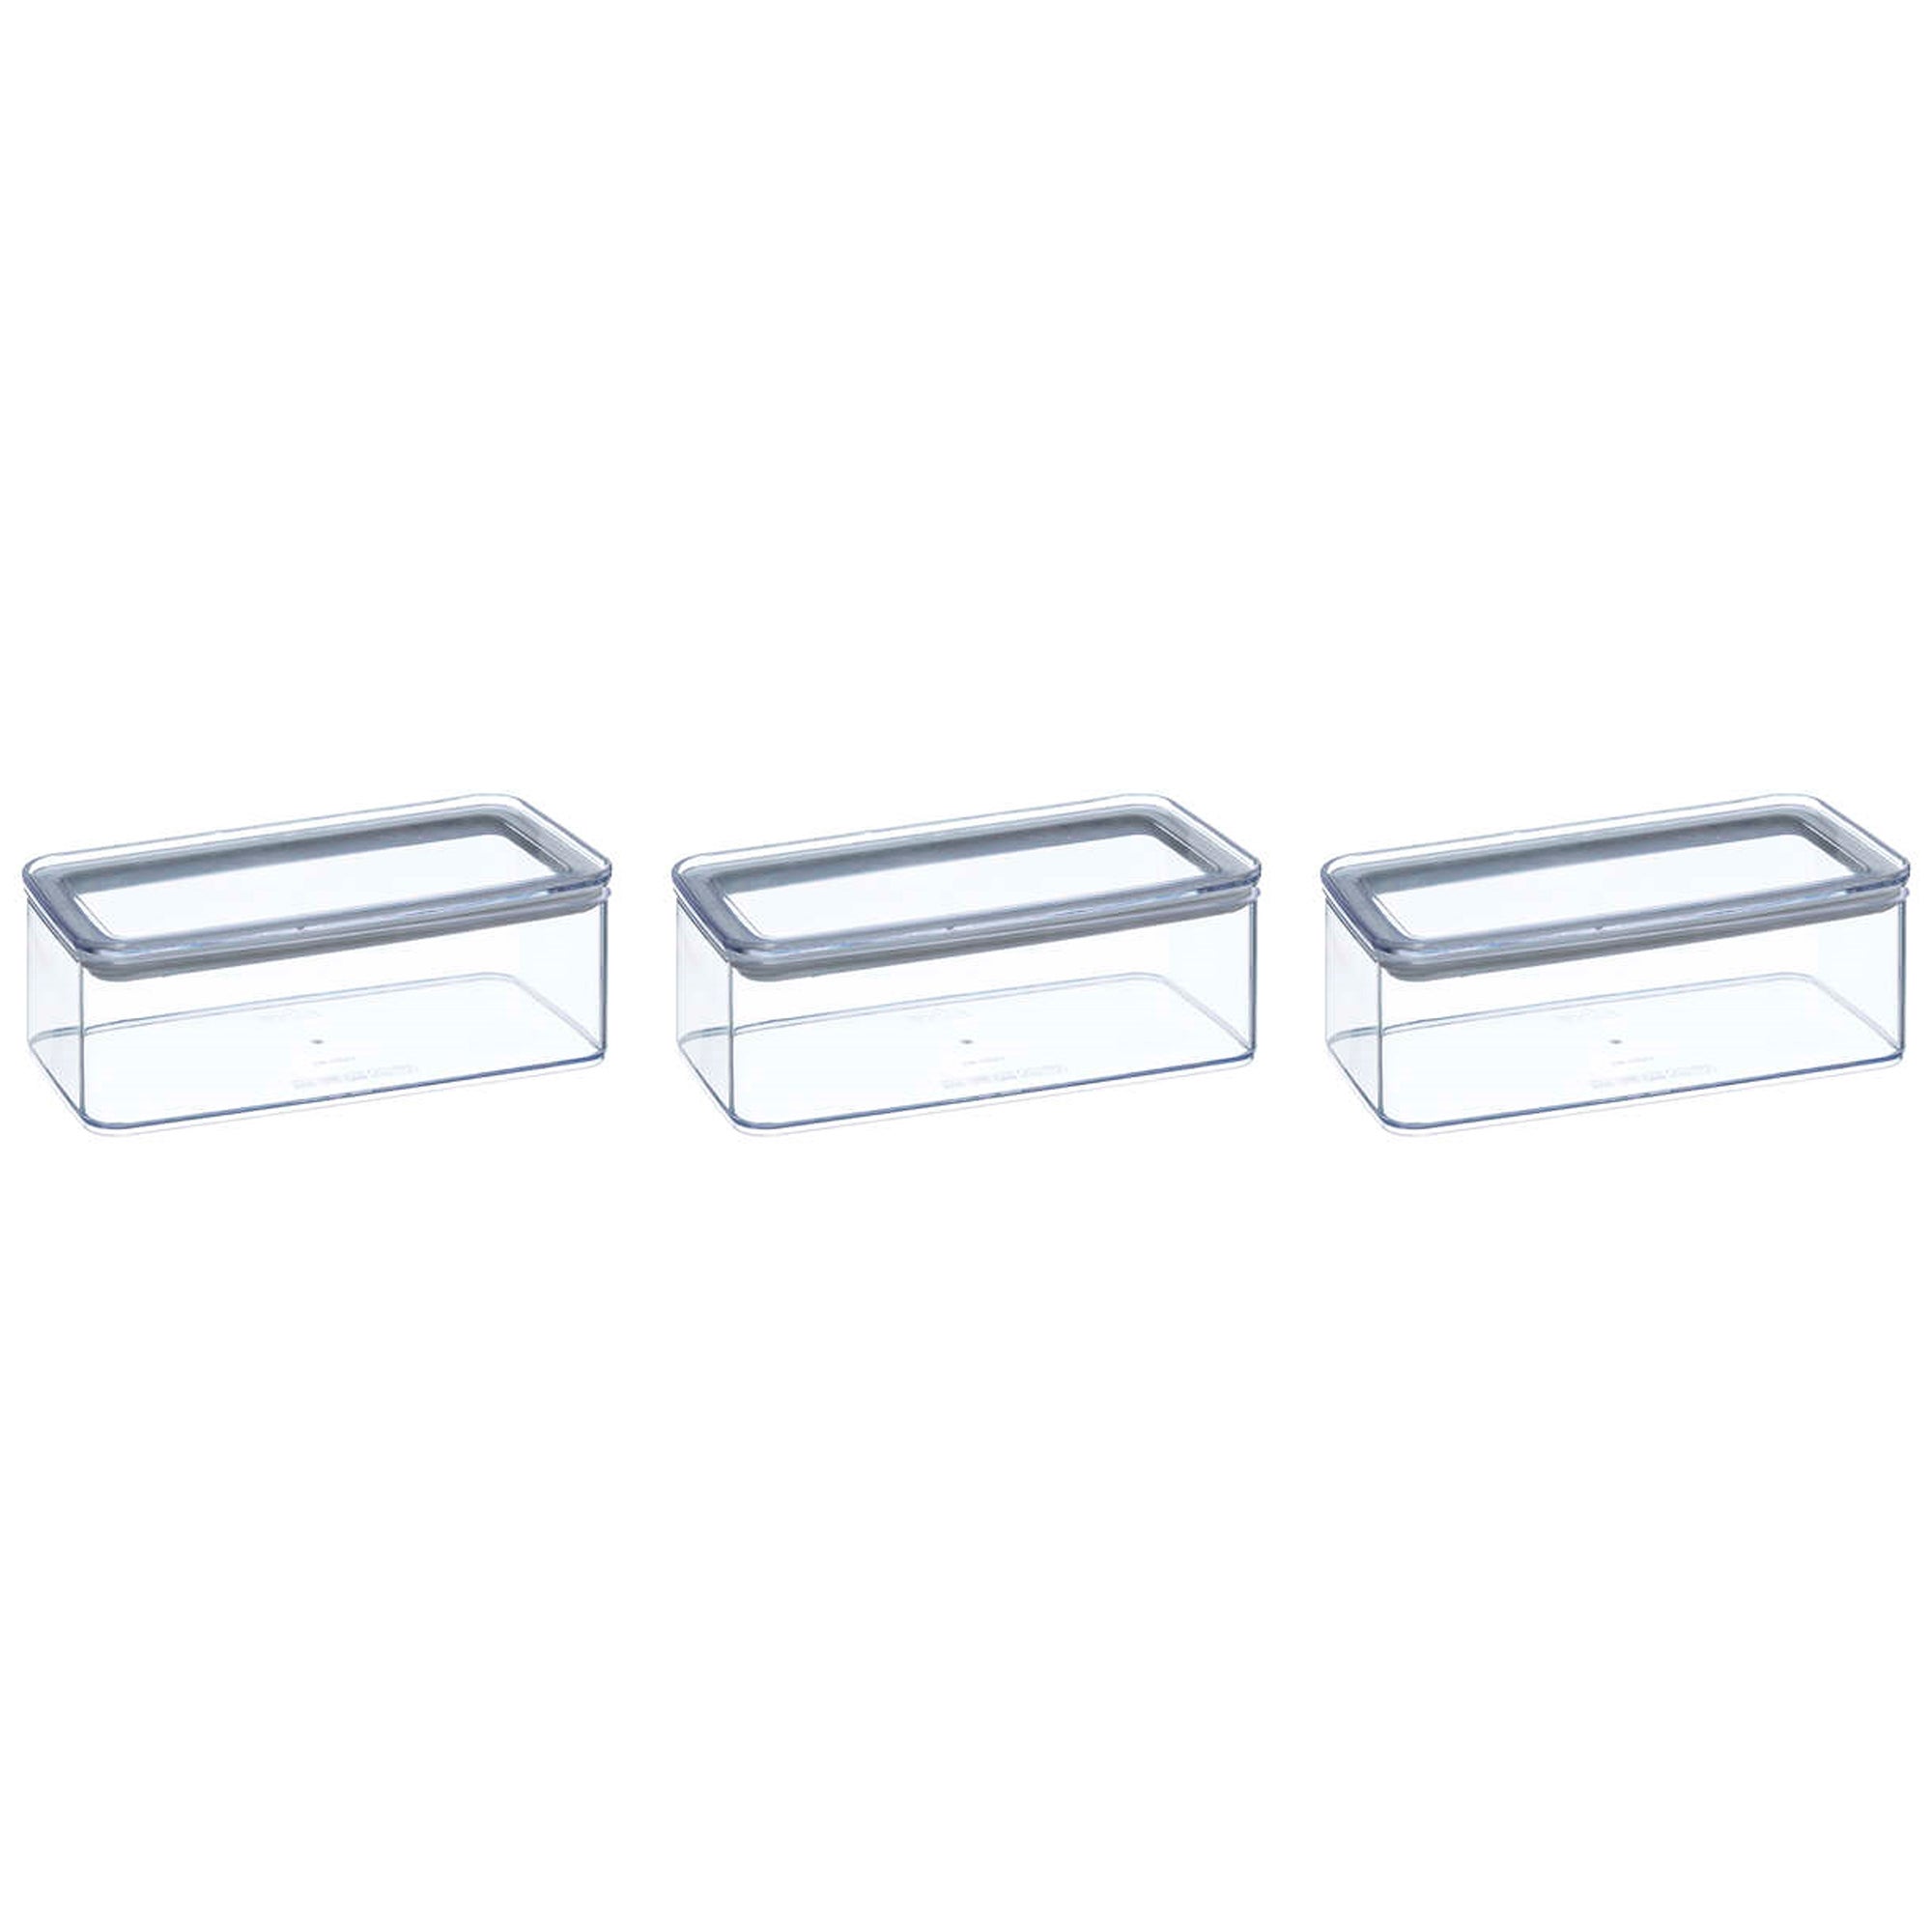 Set of 3 Air Tight Food Storage Boxes